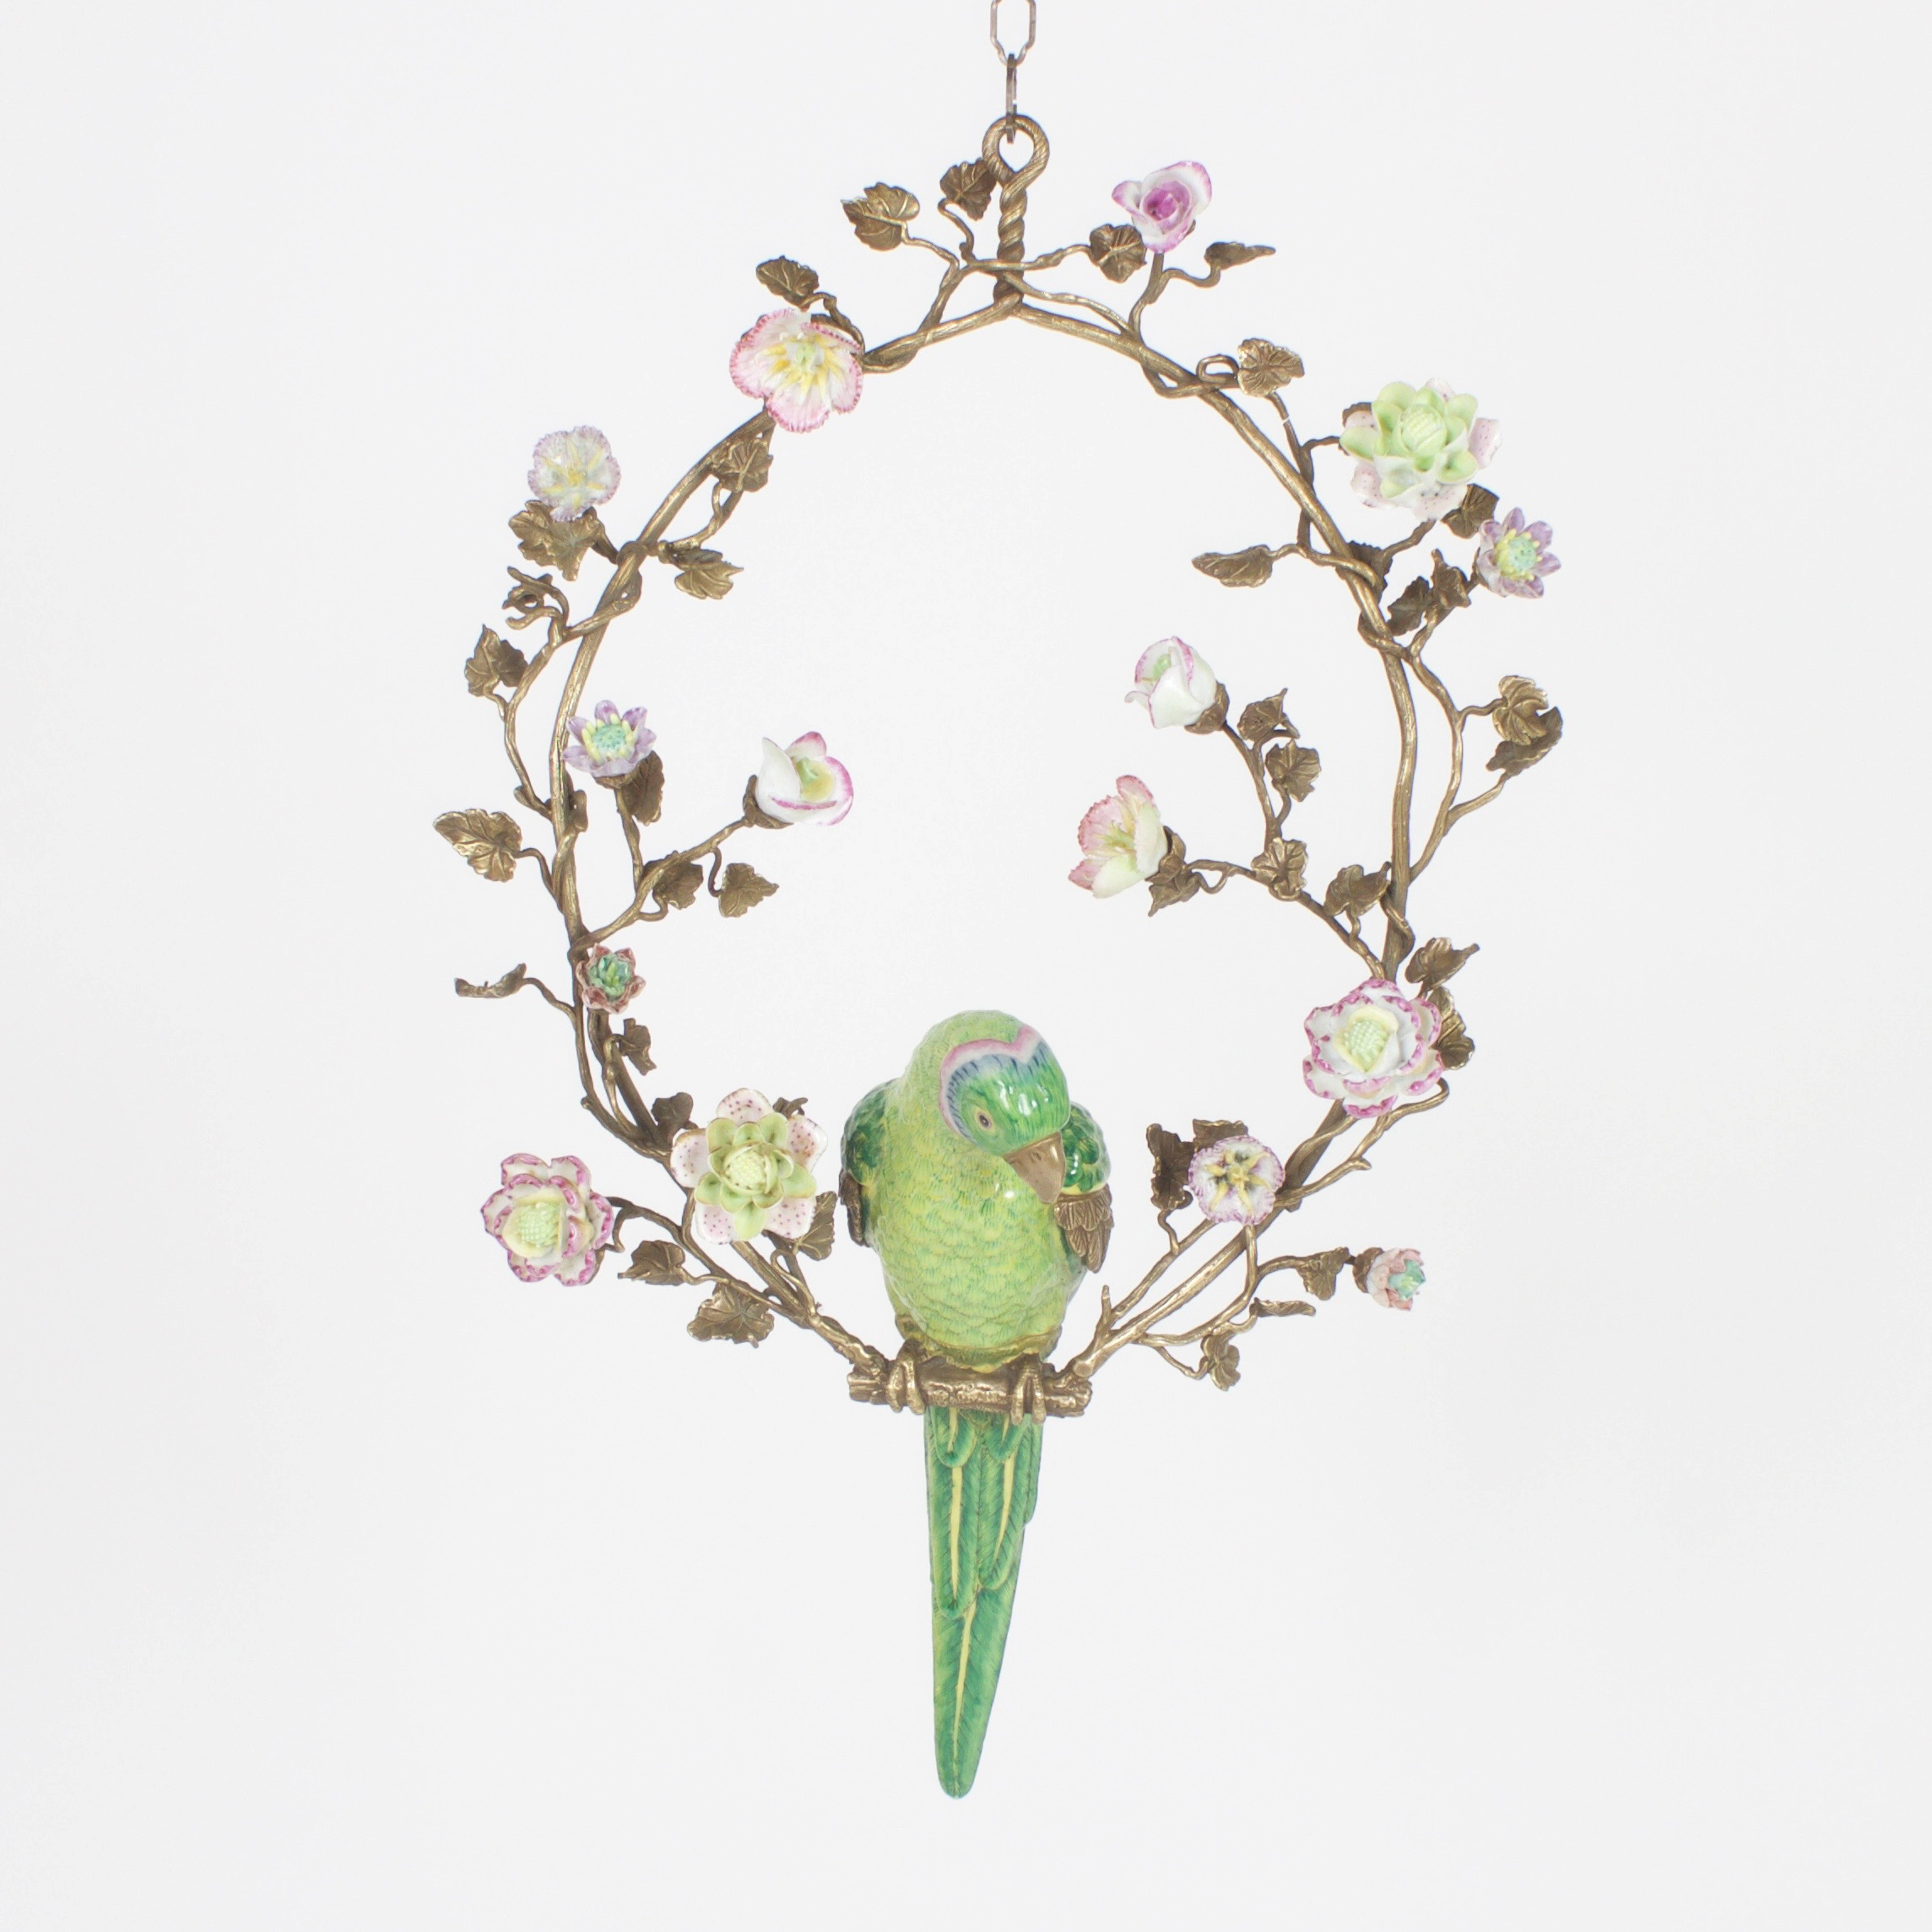 Inspired, opposing pair of French porcelain parrots perched on a finely crafted brass wreath with porcelain spring flowers. The expert detail of the porcelain and craftsmanship of the brass wreath make these objects of art a rare find indeed. 

.
 